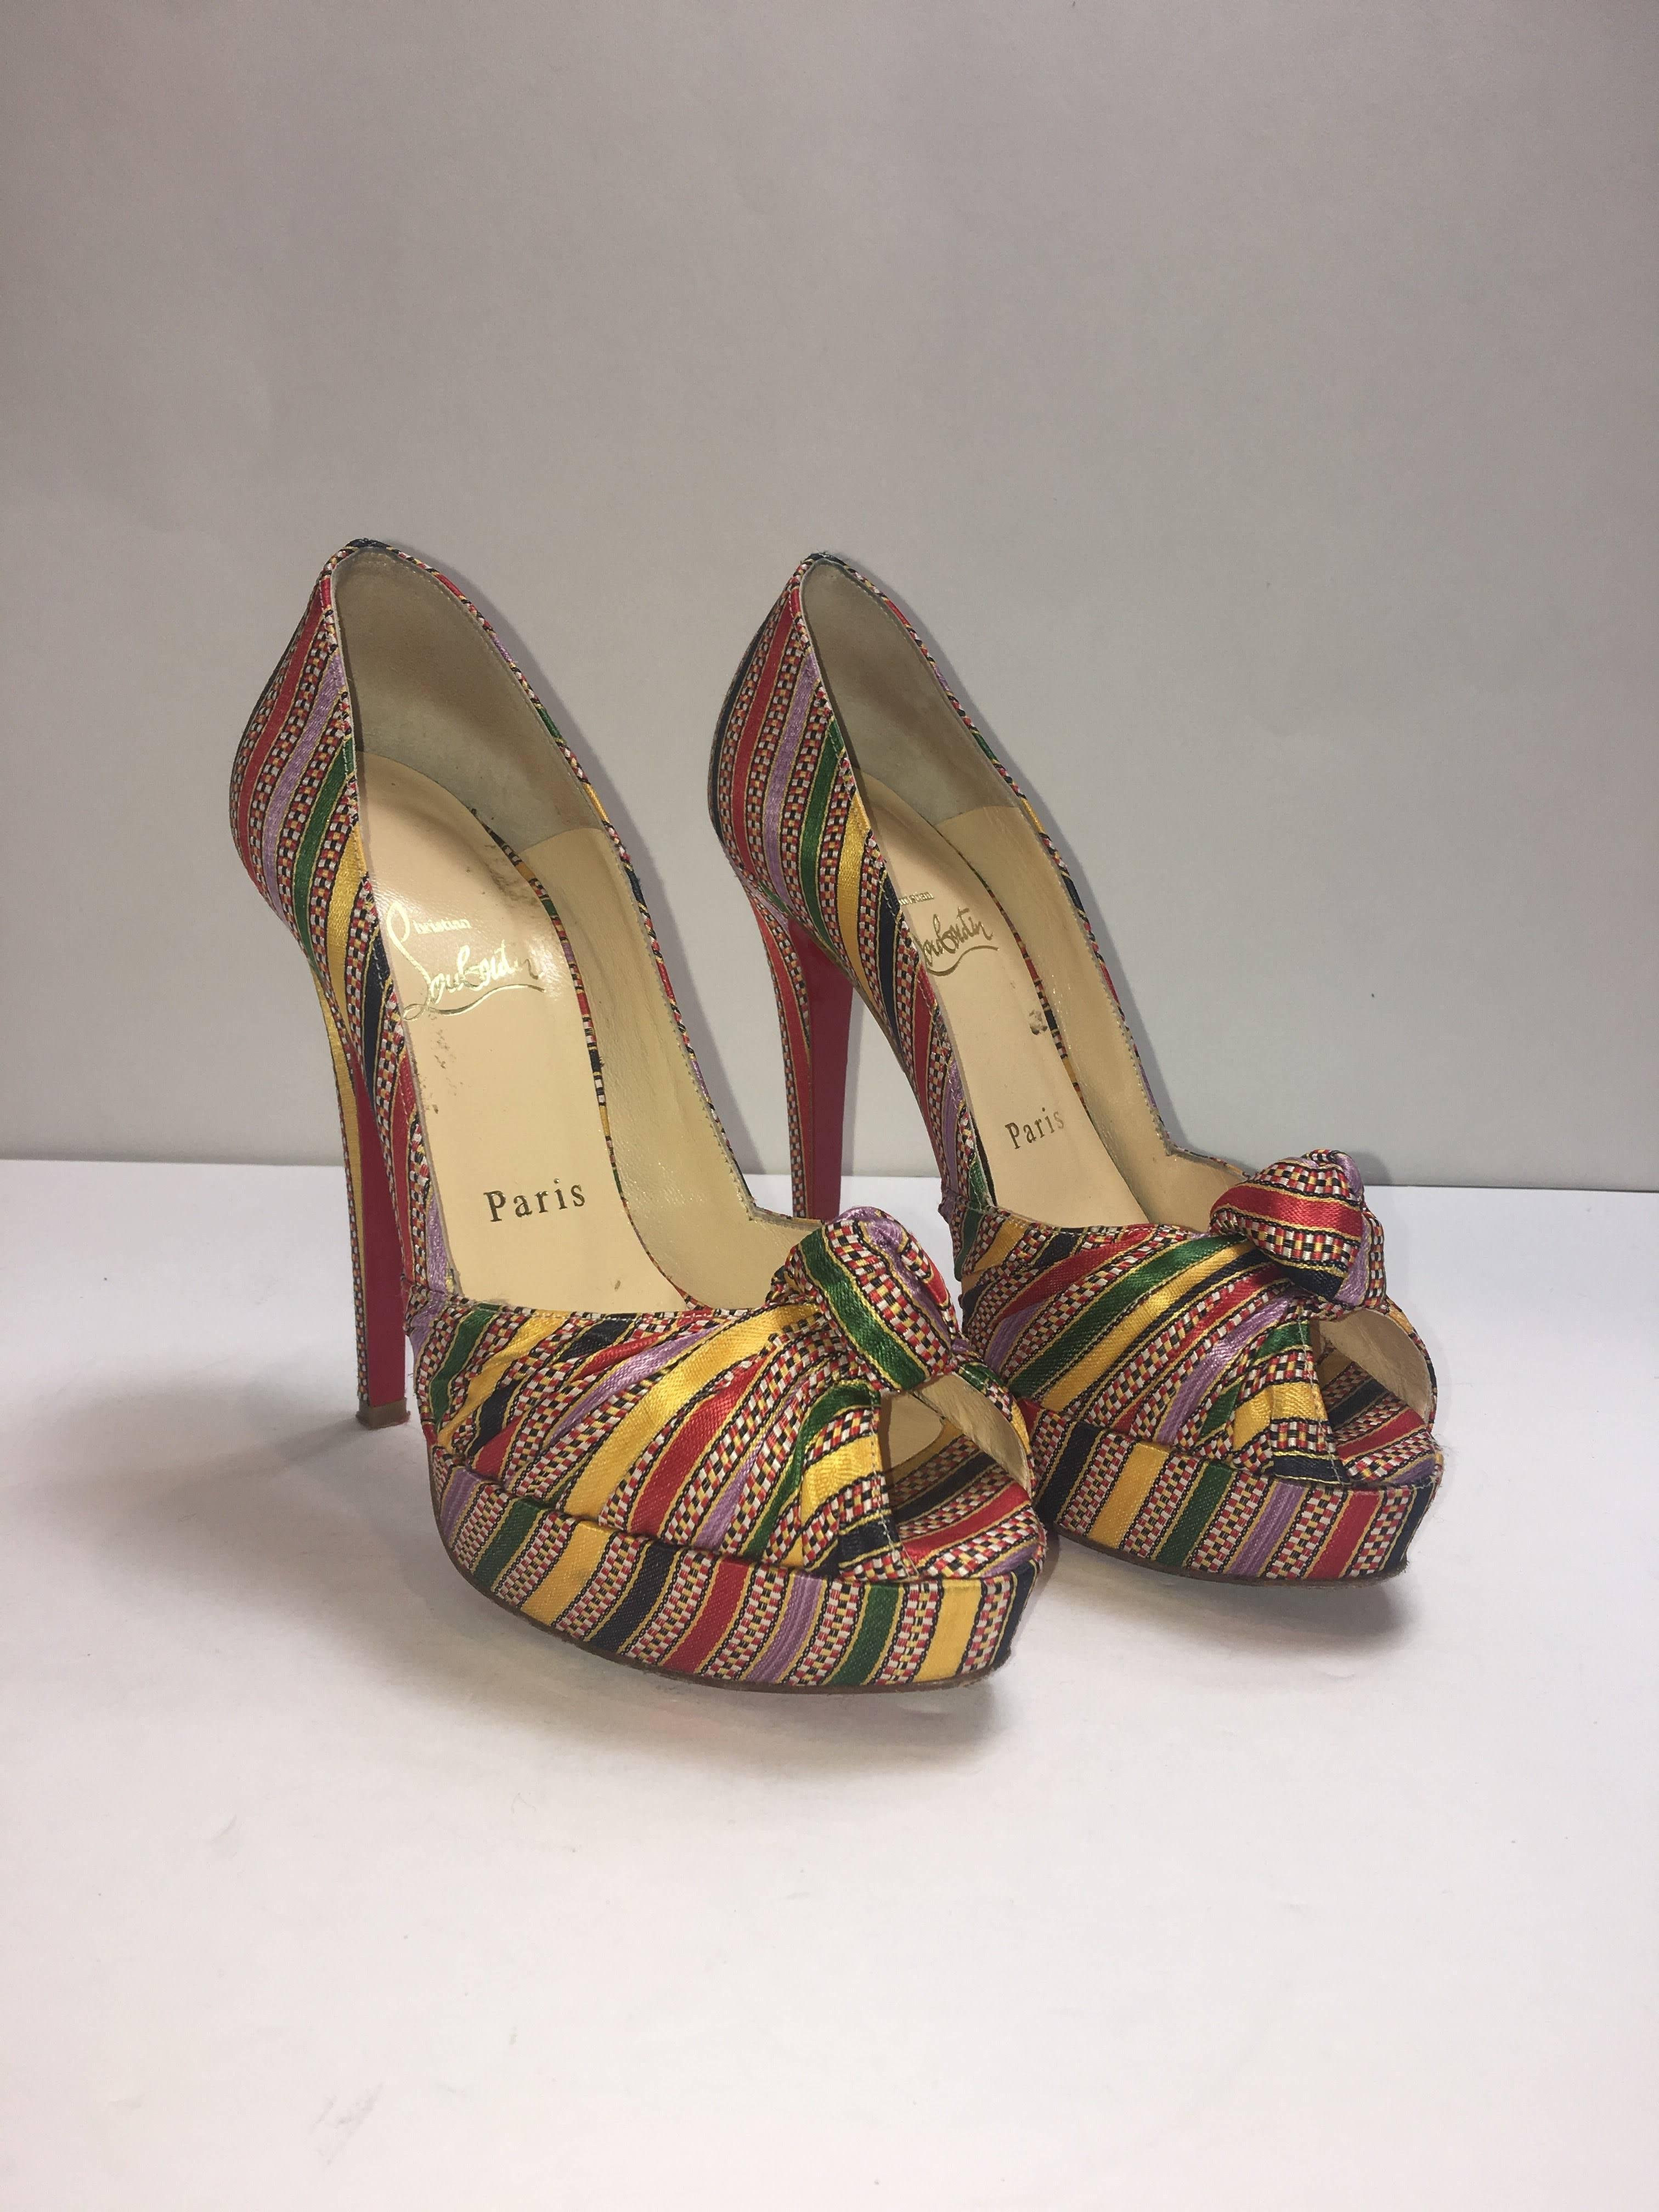 Christian Louboutin Platform Peep Toe with Knot at Toe and Multi Color Stripe Pattern.